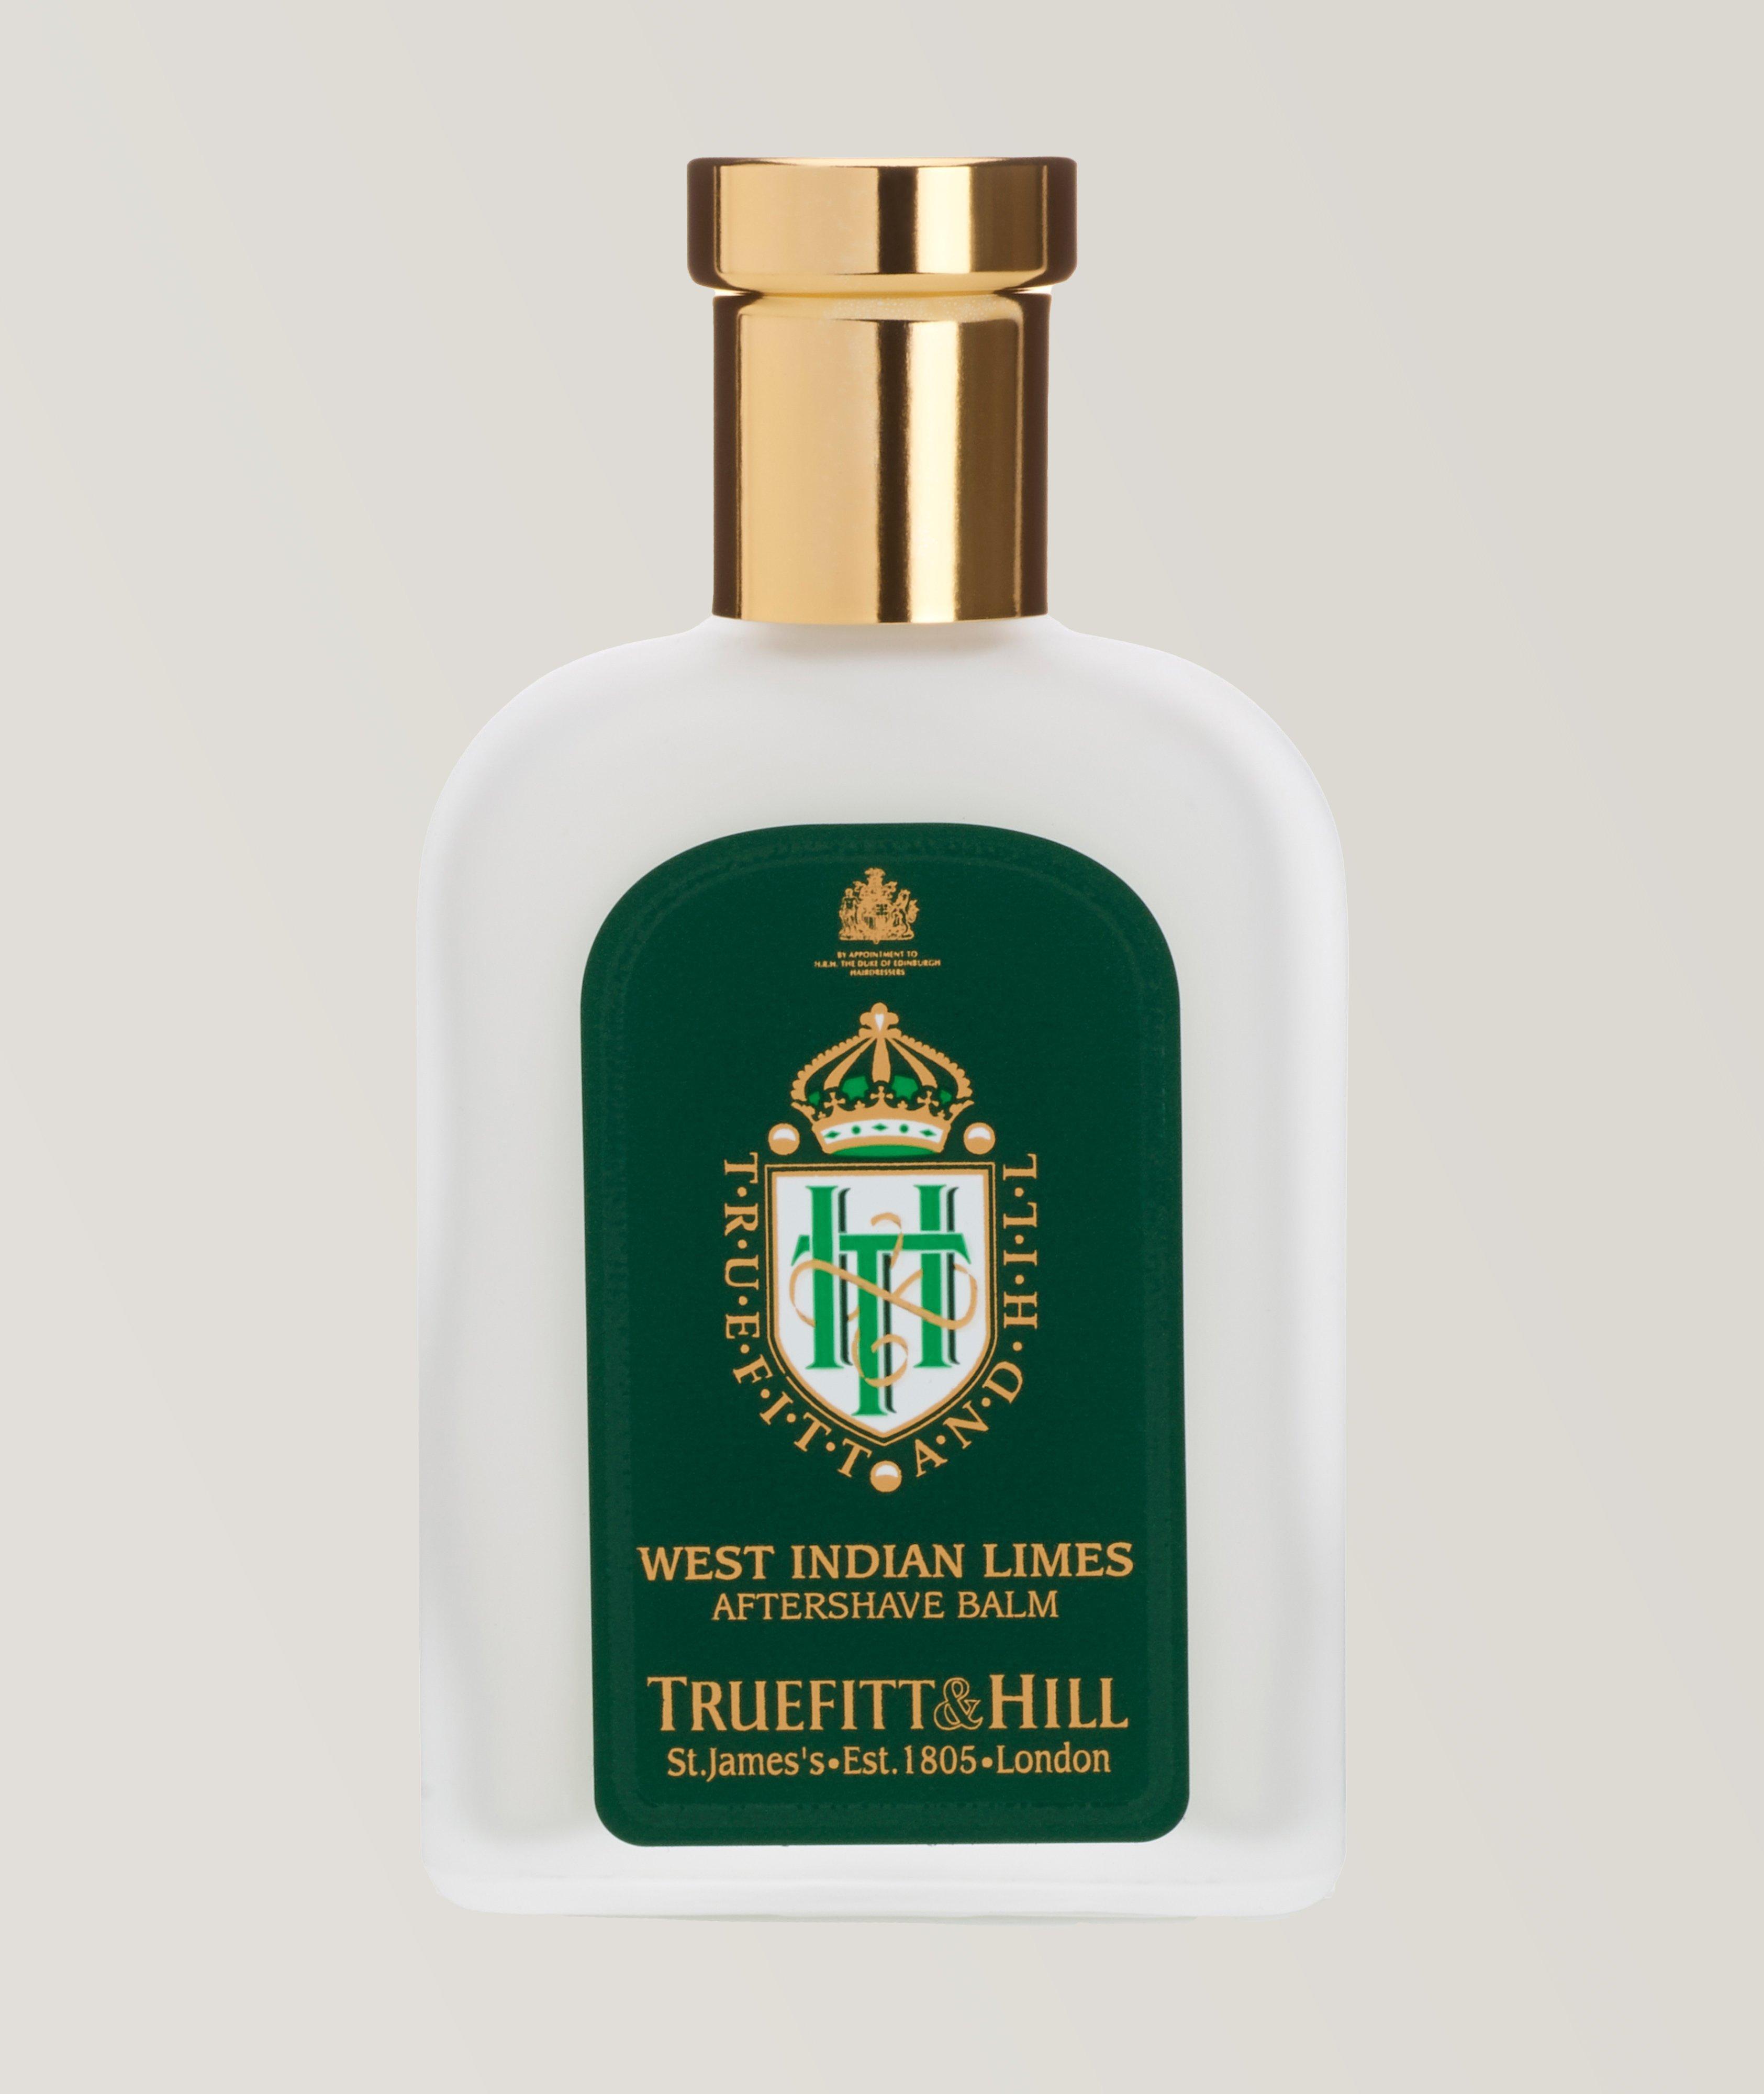 West Indian Limes Aftershave Balm image 0